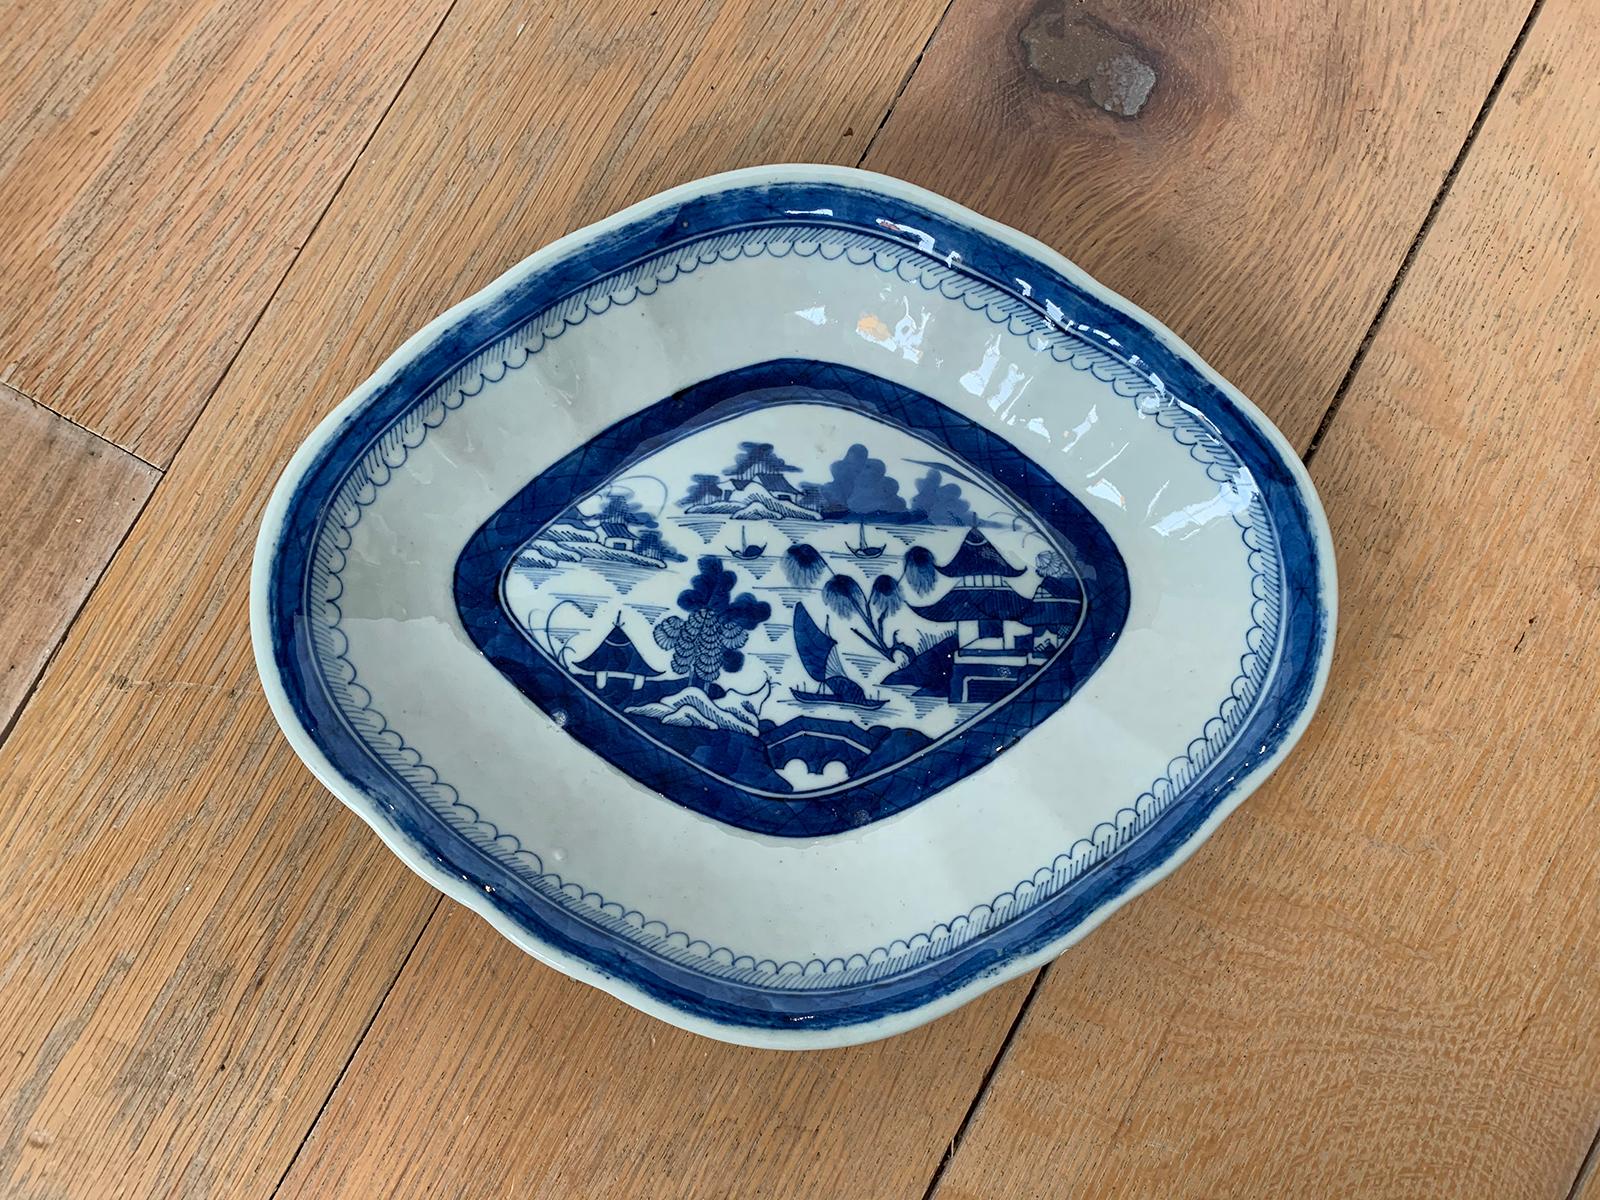 19th century Chinese Export canton ware oval blue and white porcelain plate, unmarked.